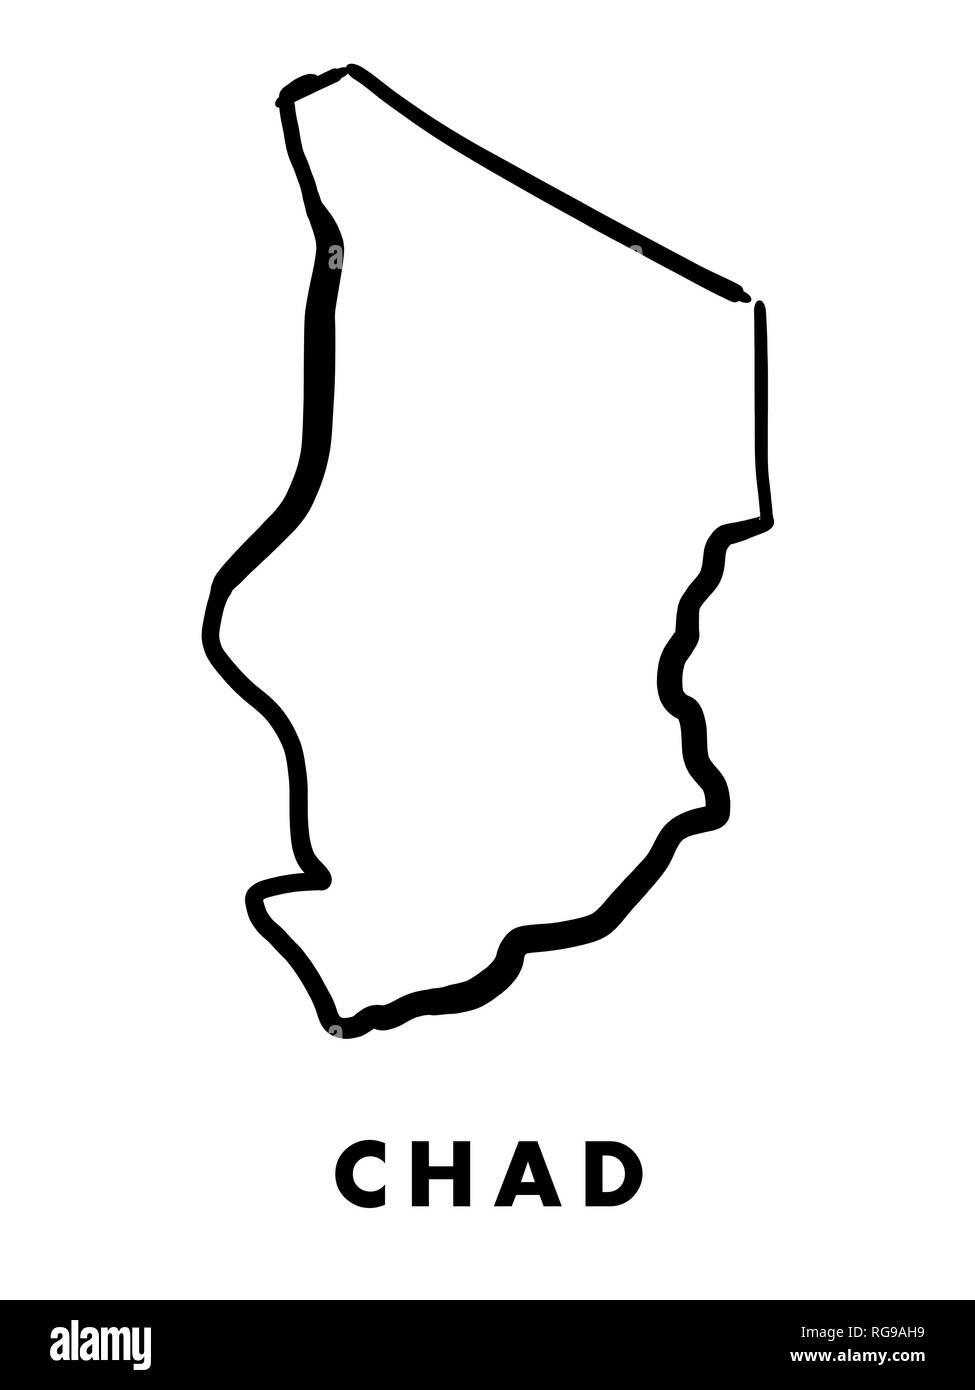 https://c8.alamy.com/comp/RG9AH9/chad-simple-map-outline-smooth-simplified-country-shape-map-vector-RG9AH9.jpg